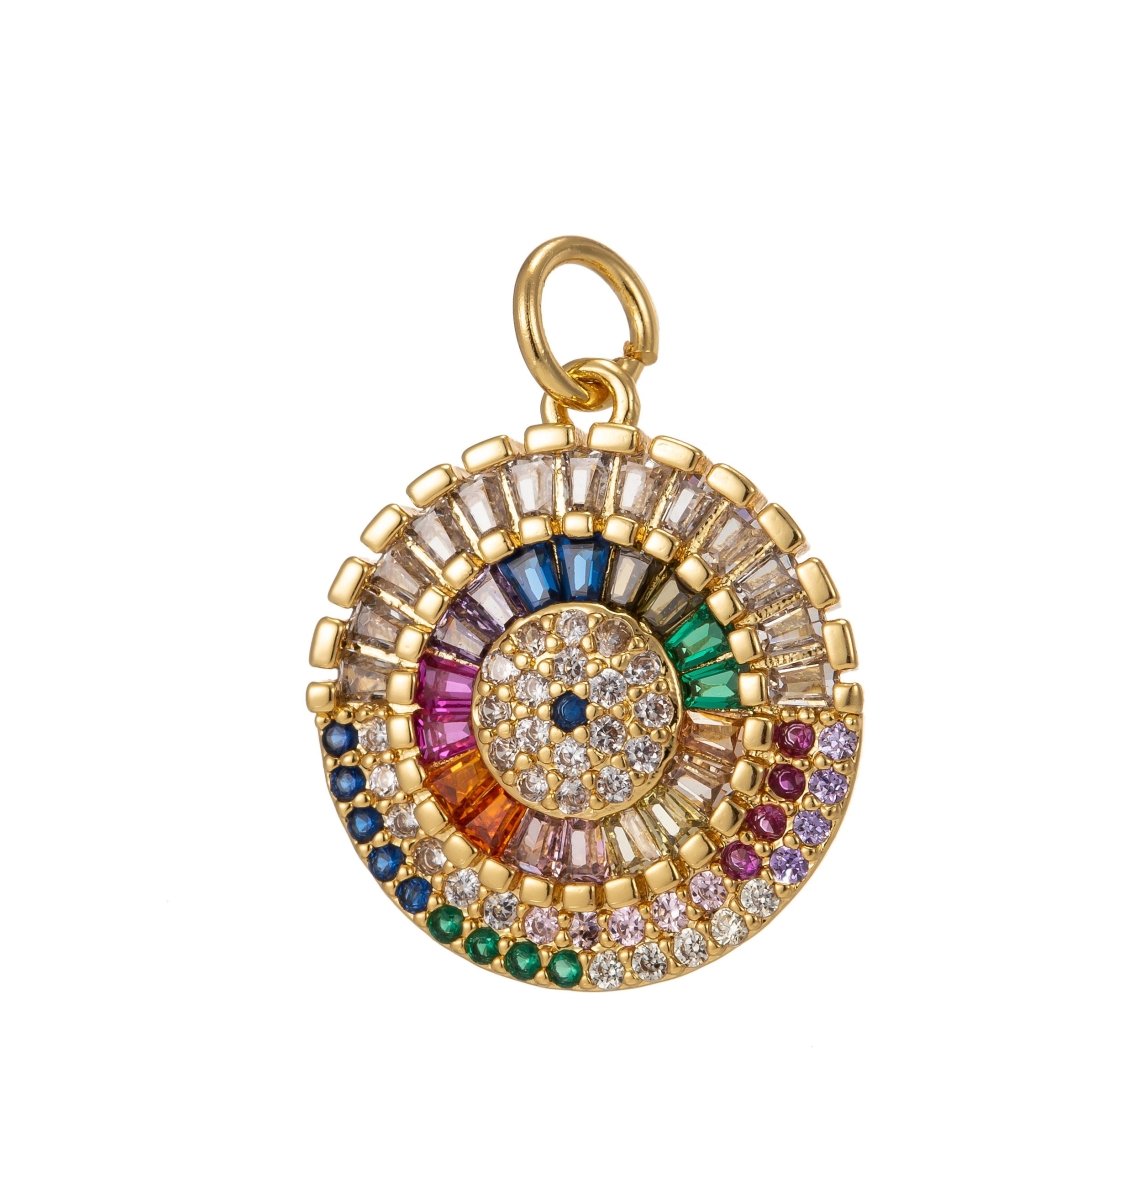 Dainty Round Charm CZ Micro Pave, Disc Charm, Multi Color Pave Charm , Dainty Charms,Cubic Zirconia Bracelet Earring Necklace Charm 20x15mm I-442 - DLUXCA